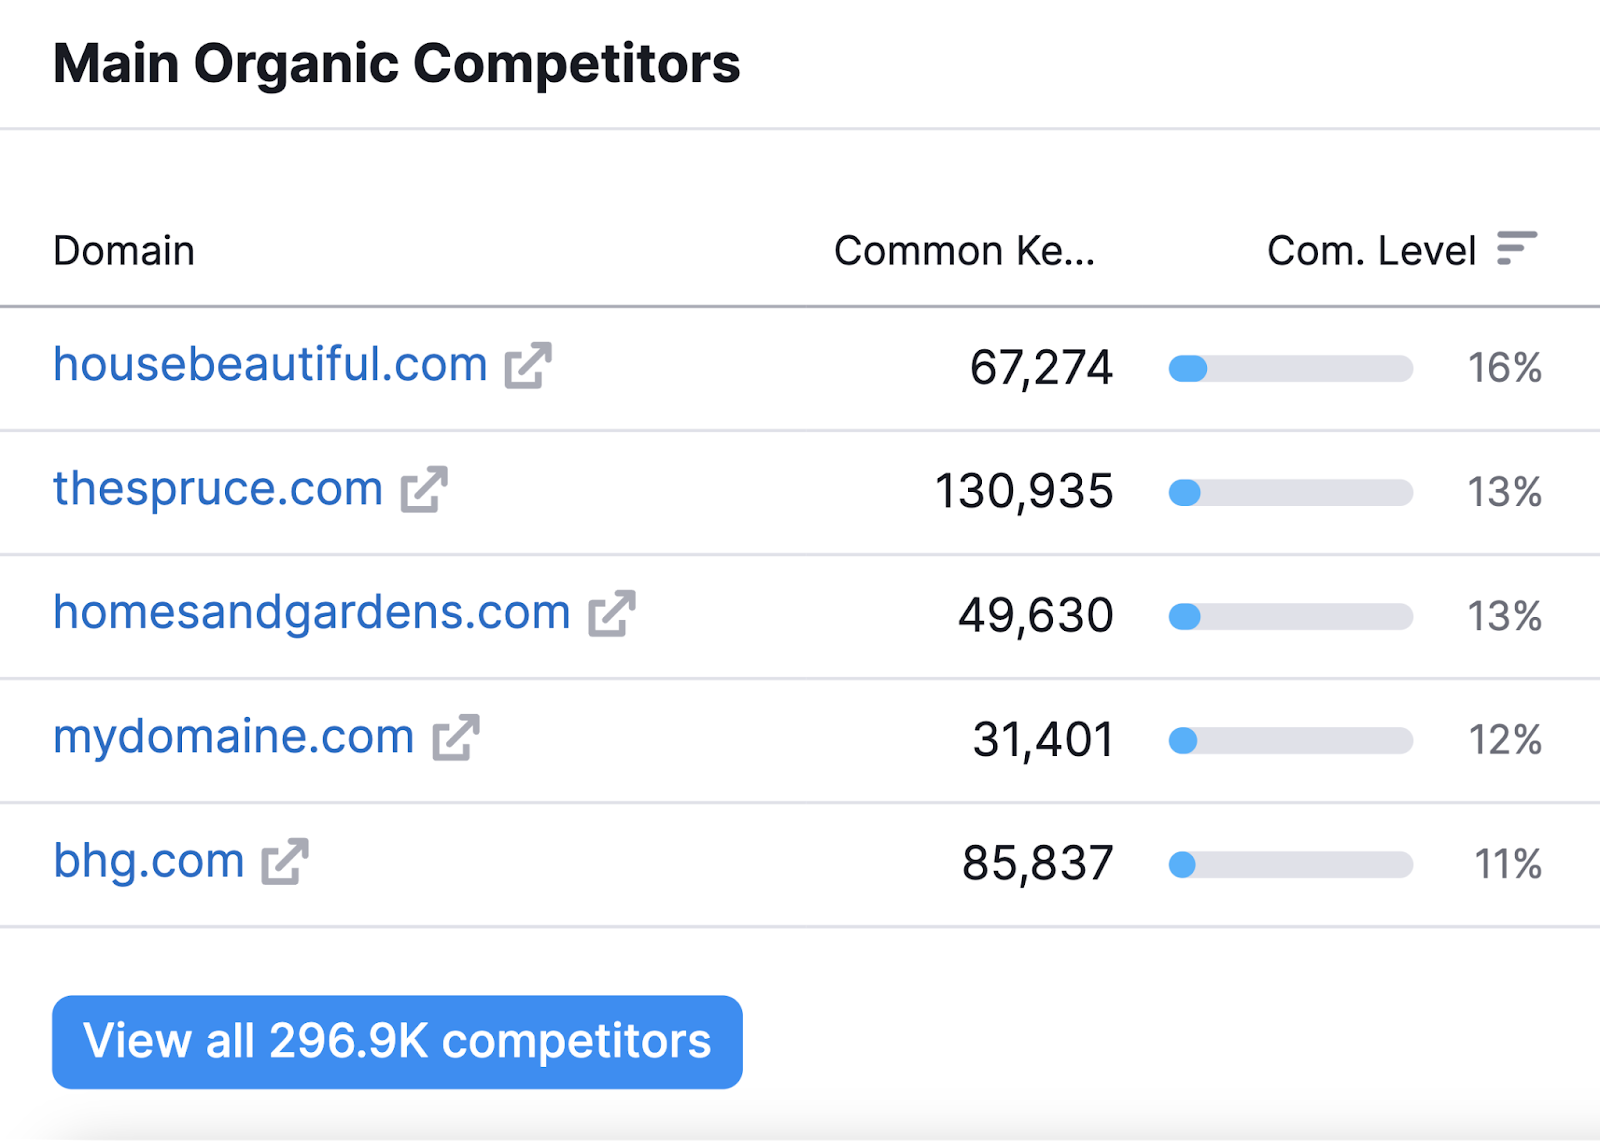 "Main Organic Competitors" section